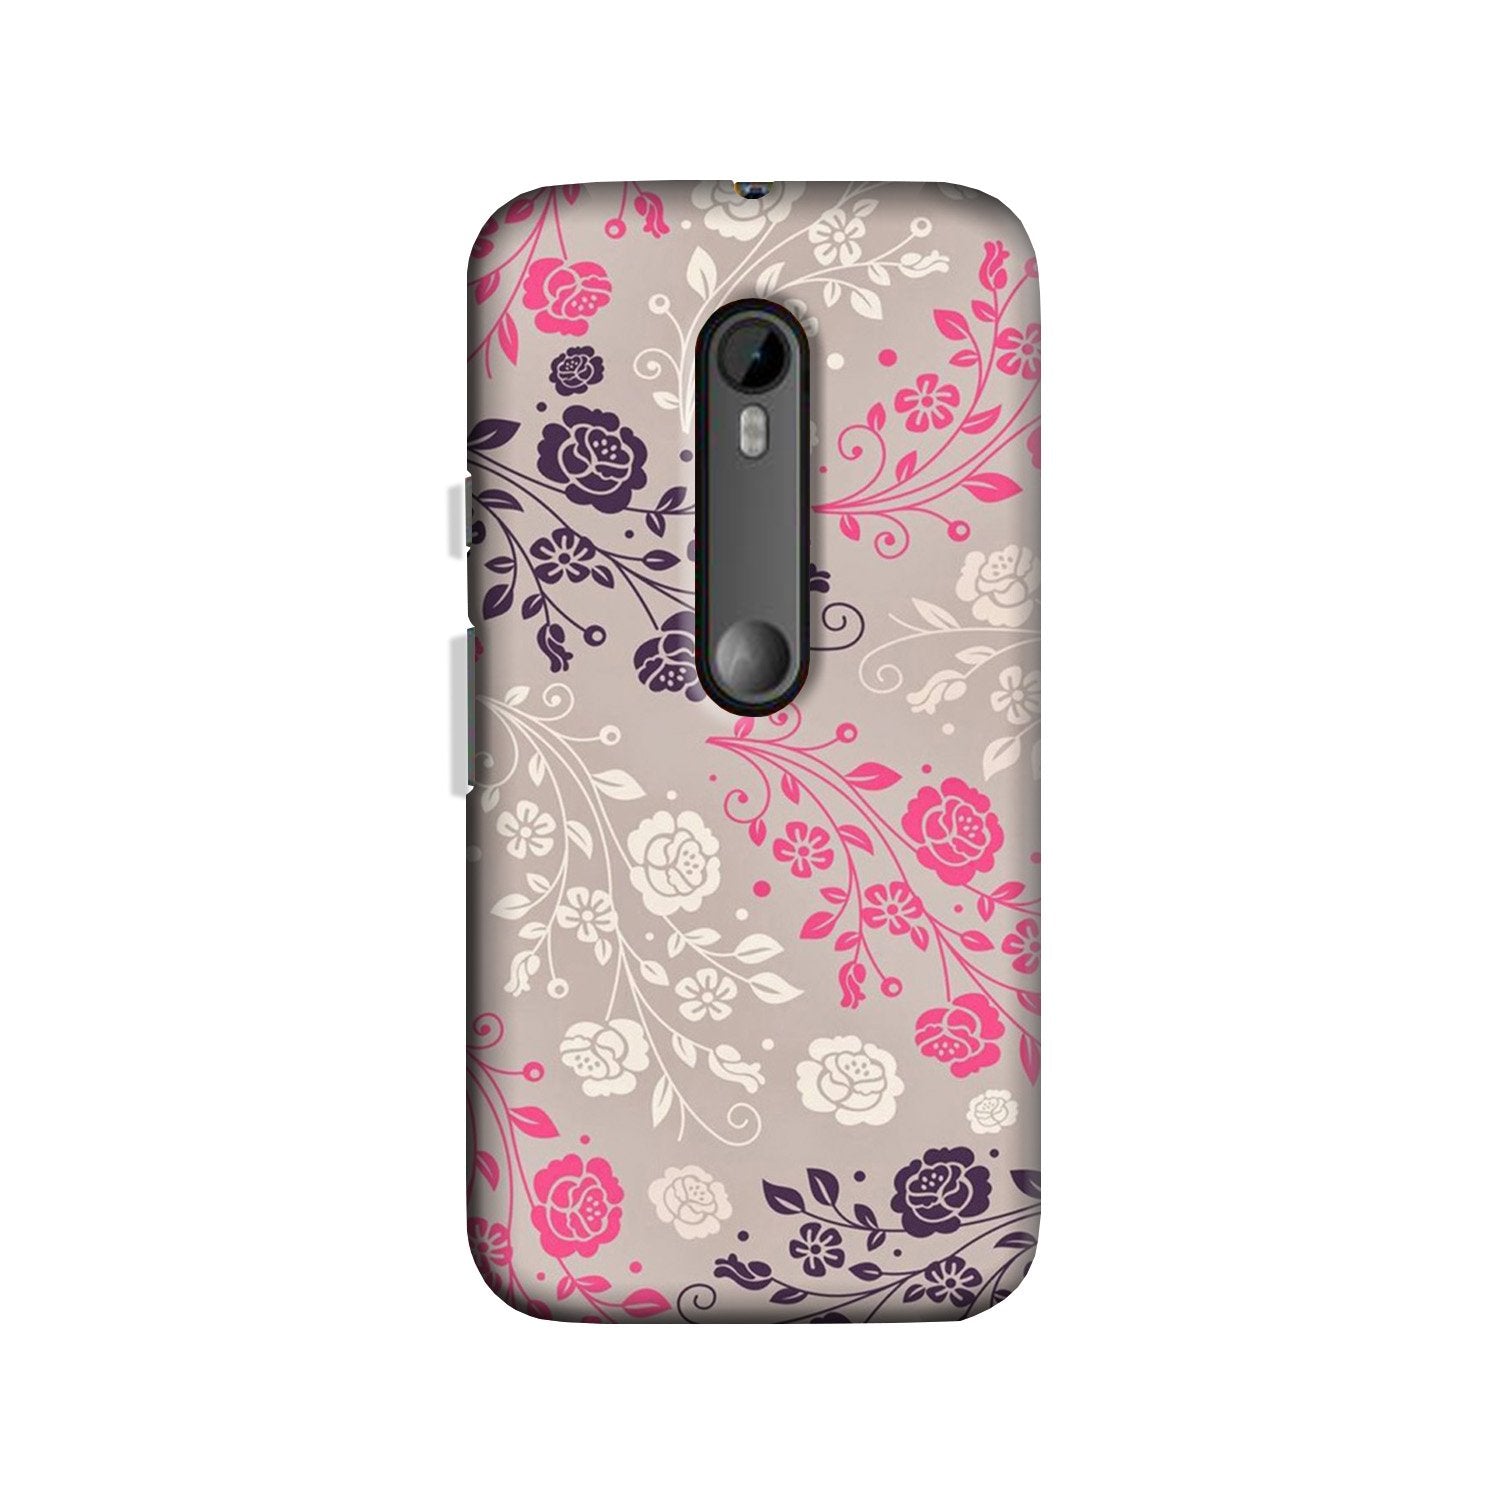 Pattern2 Case for Moto X Force